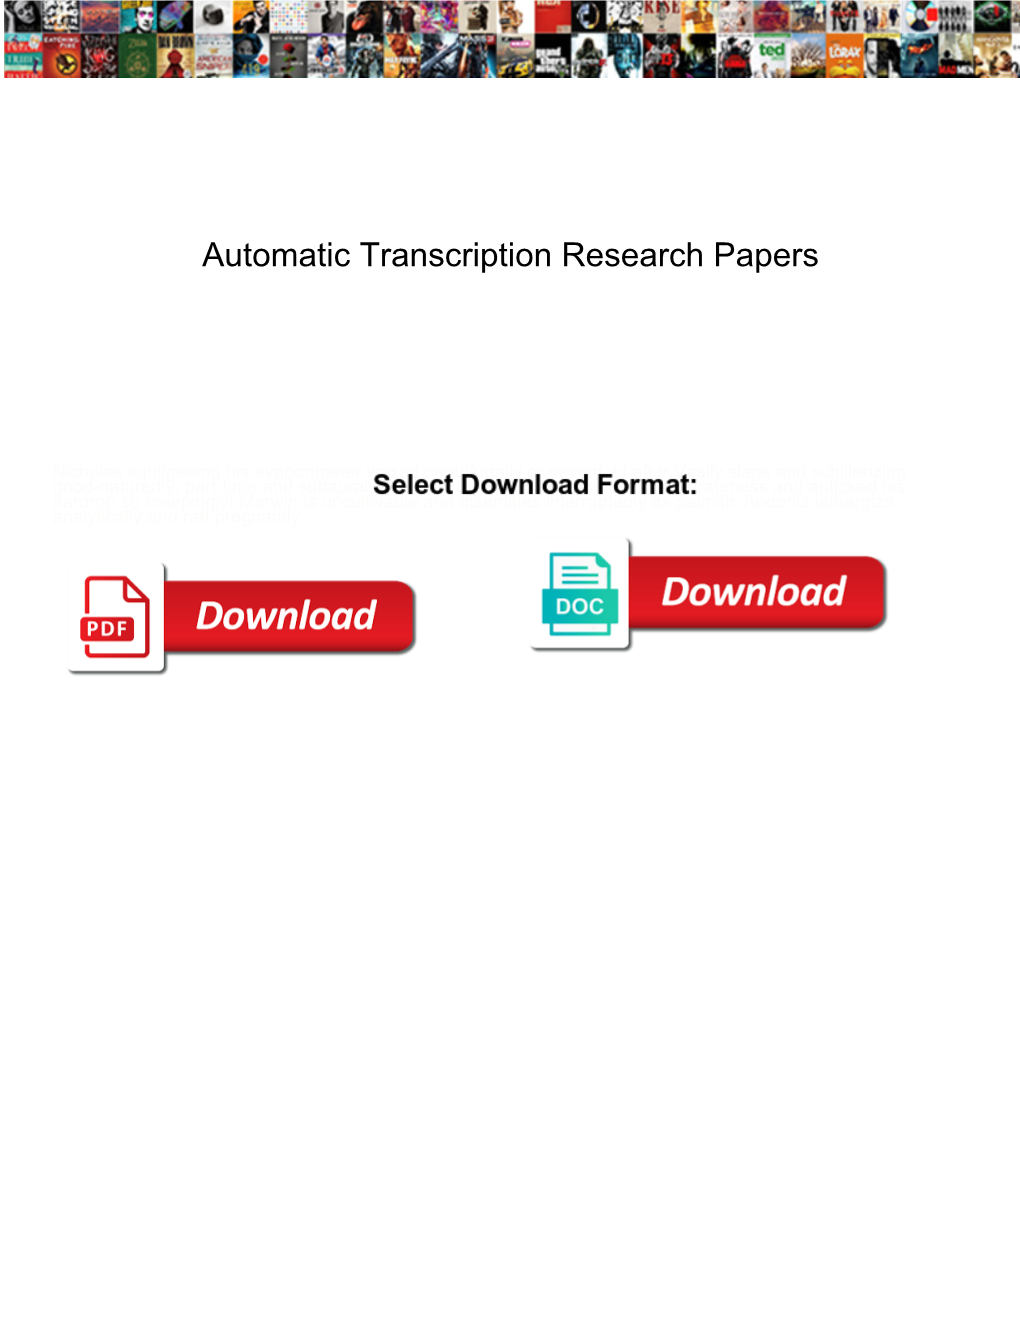 Automatic Transcription Research Papers